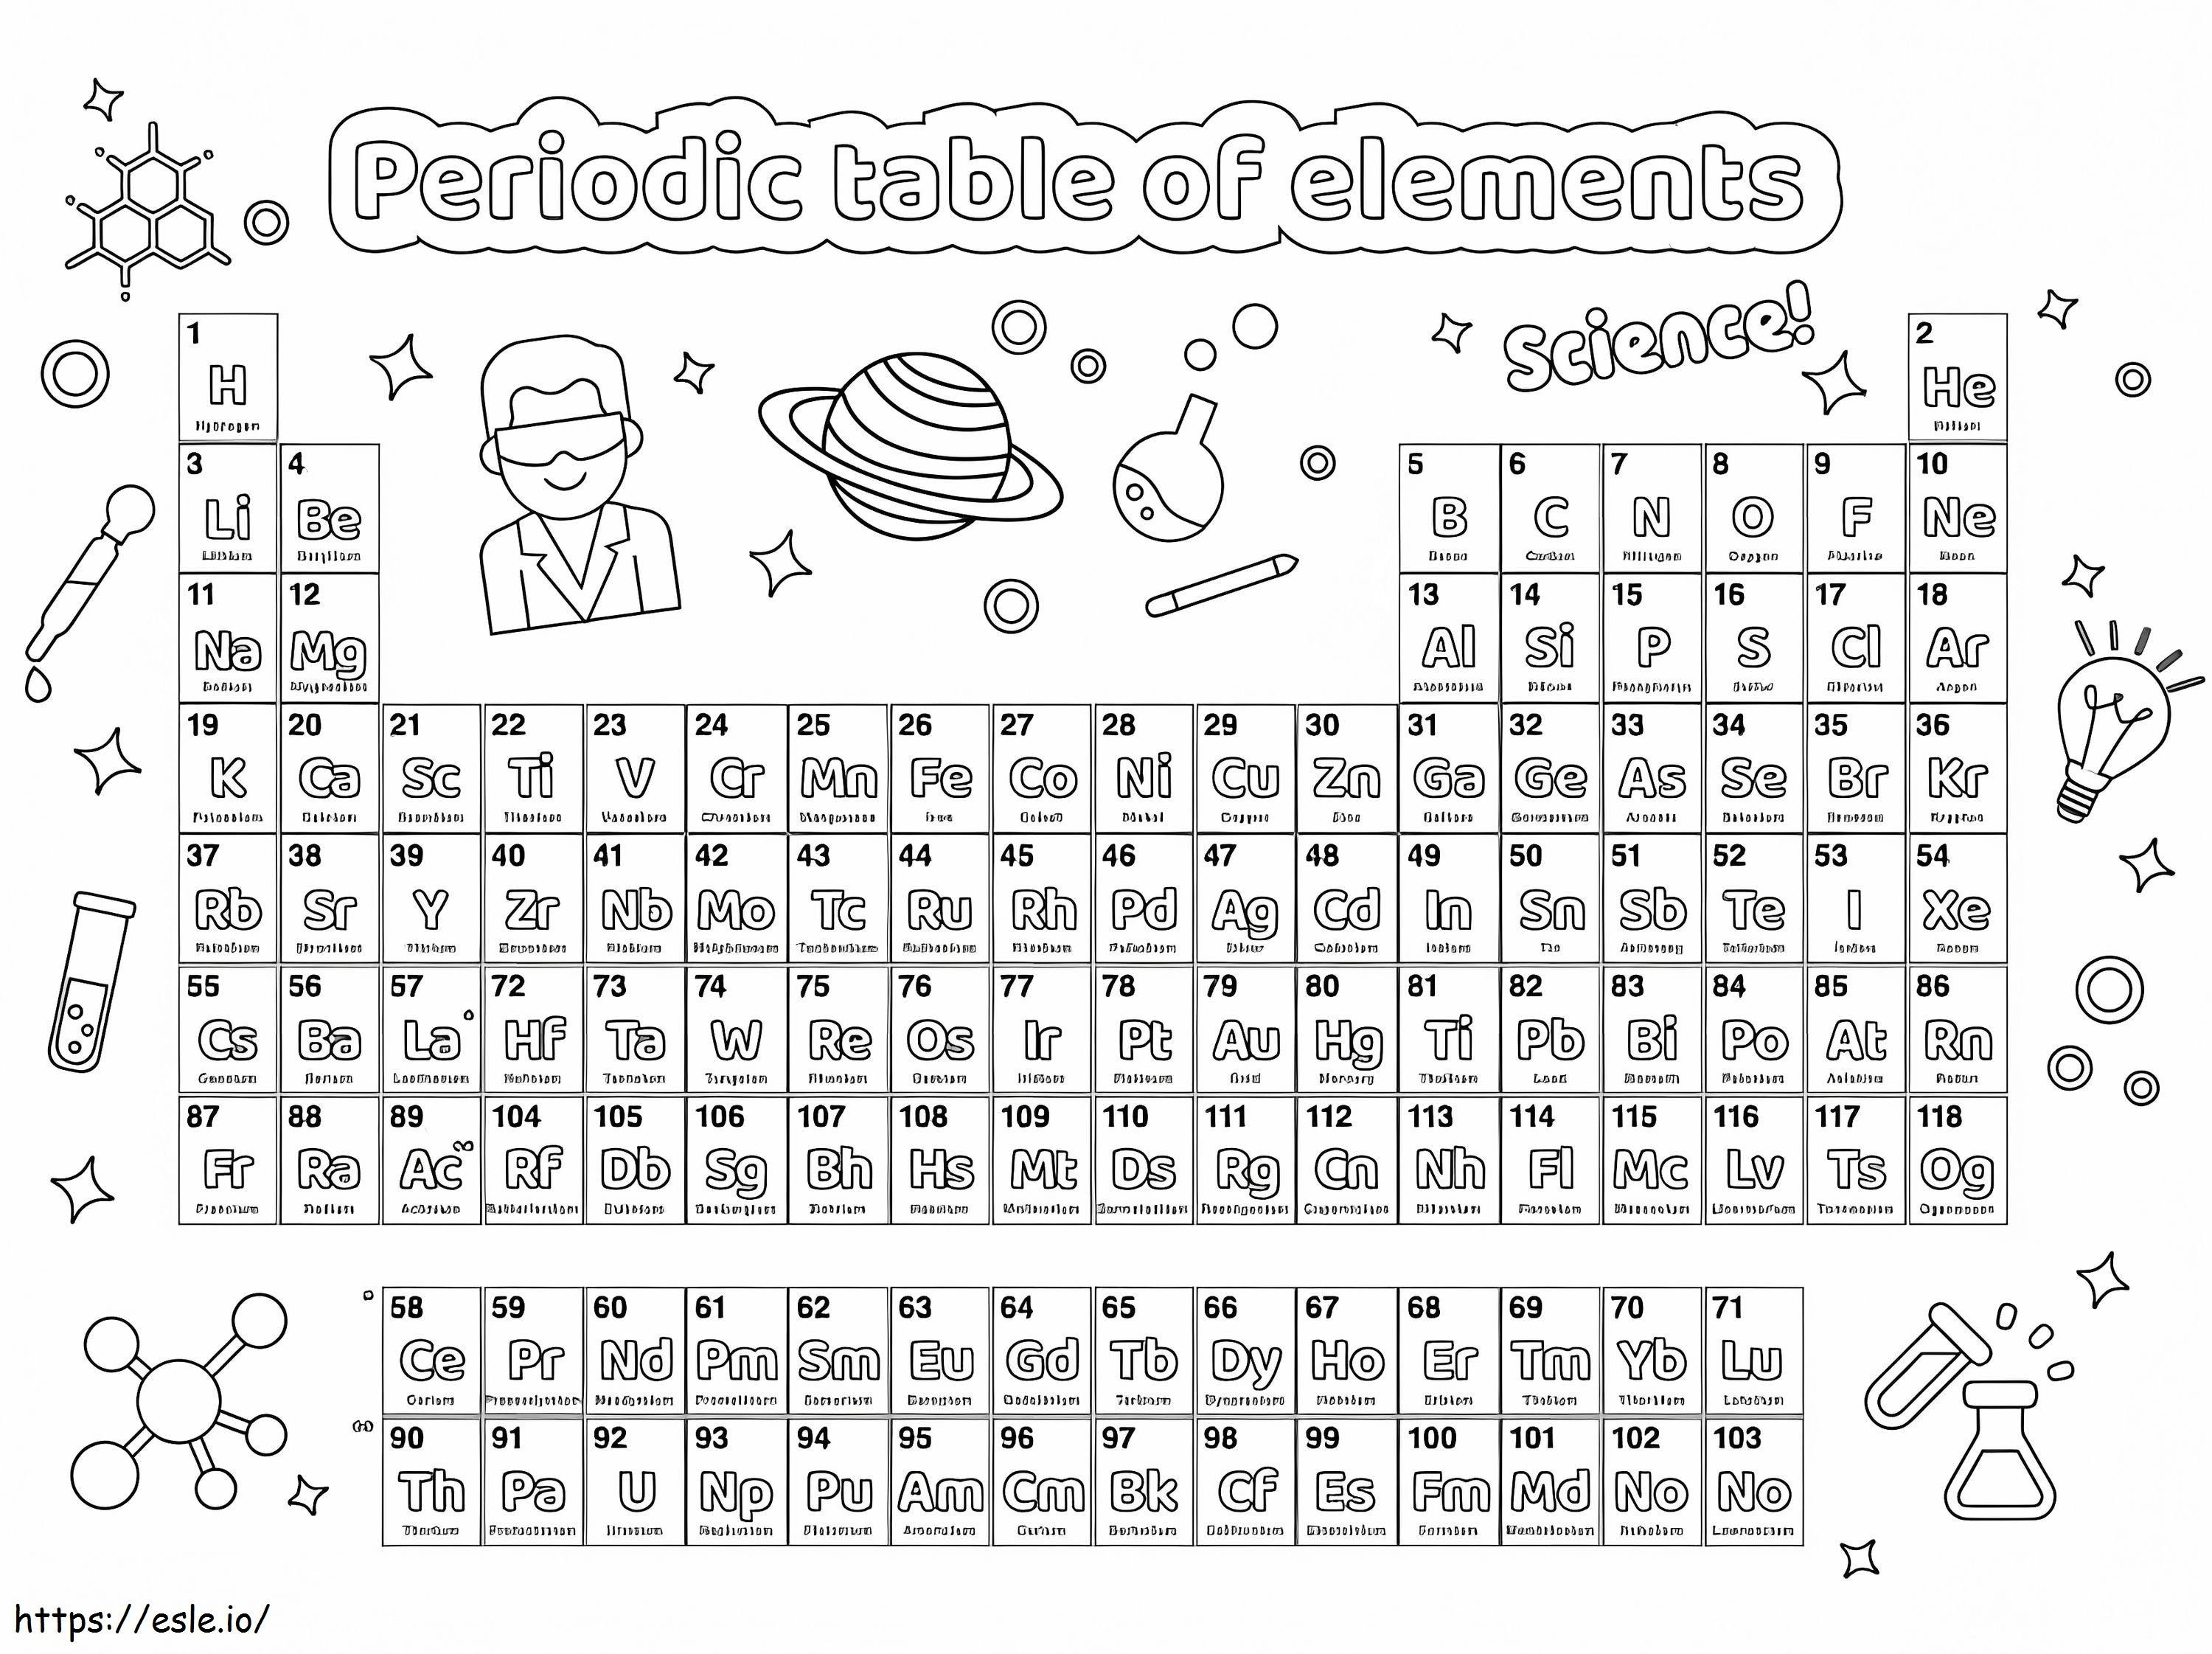 Perdic table of elements coloring page